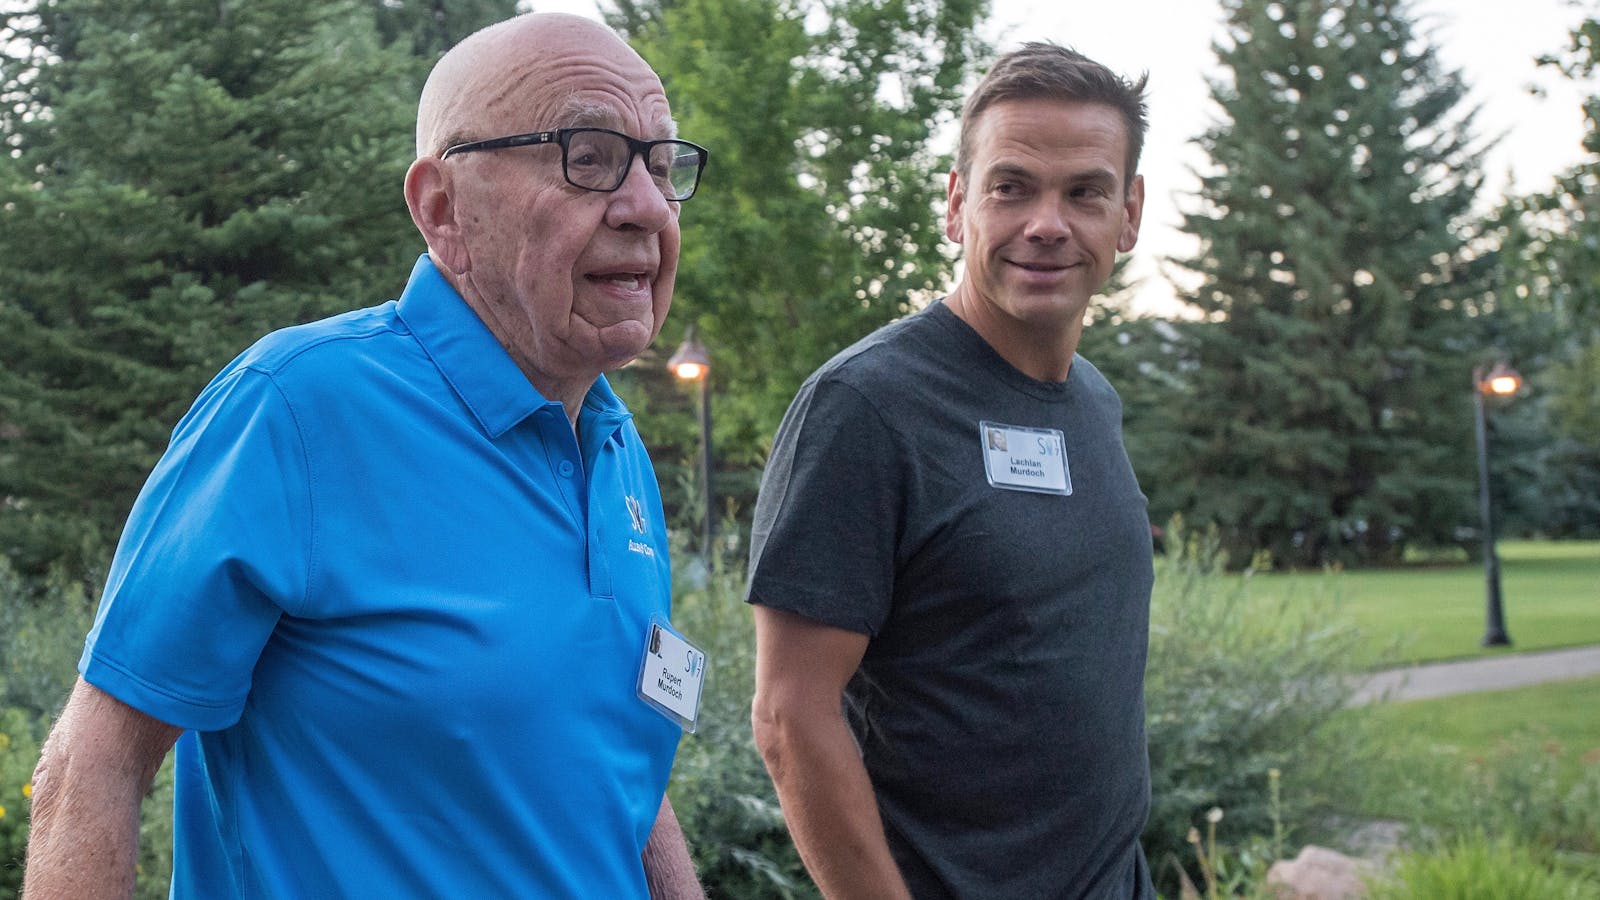 Rupert Murdoch with his son Lachlan at the Allen & Co conference in Sun Valley in July. Photo by Bloomberg.